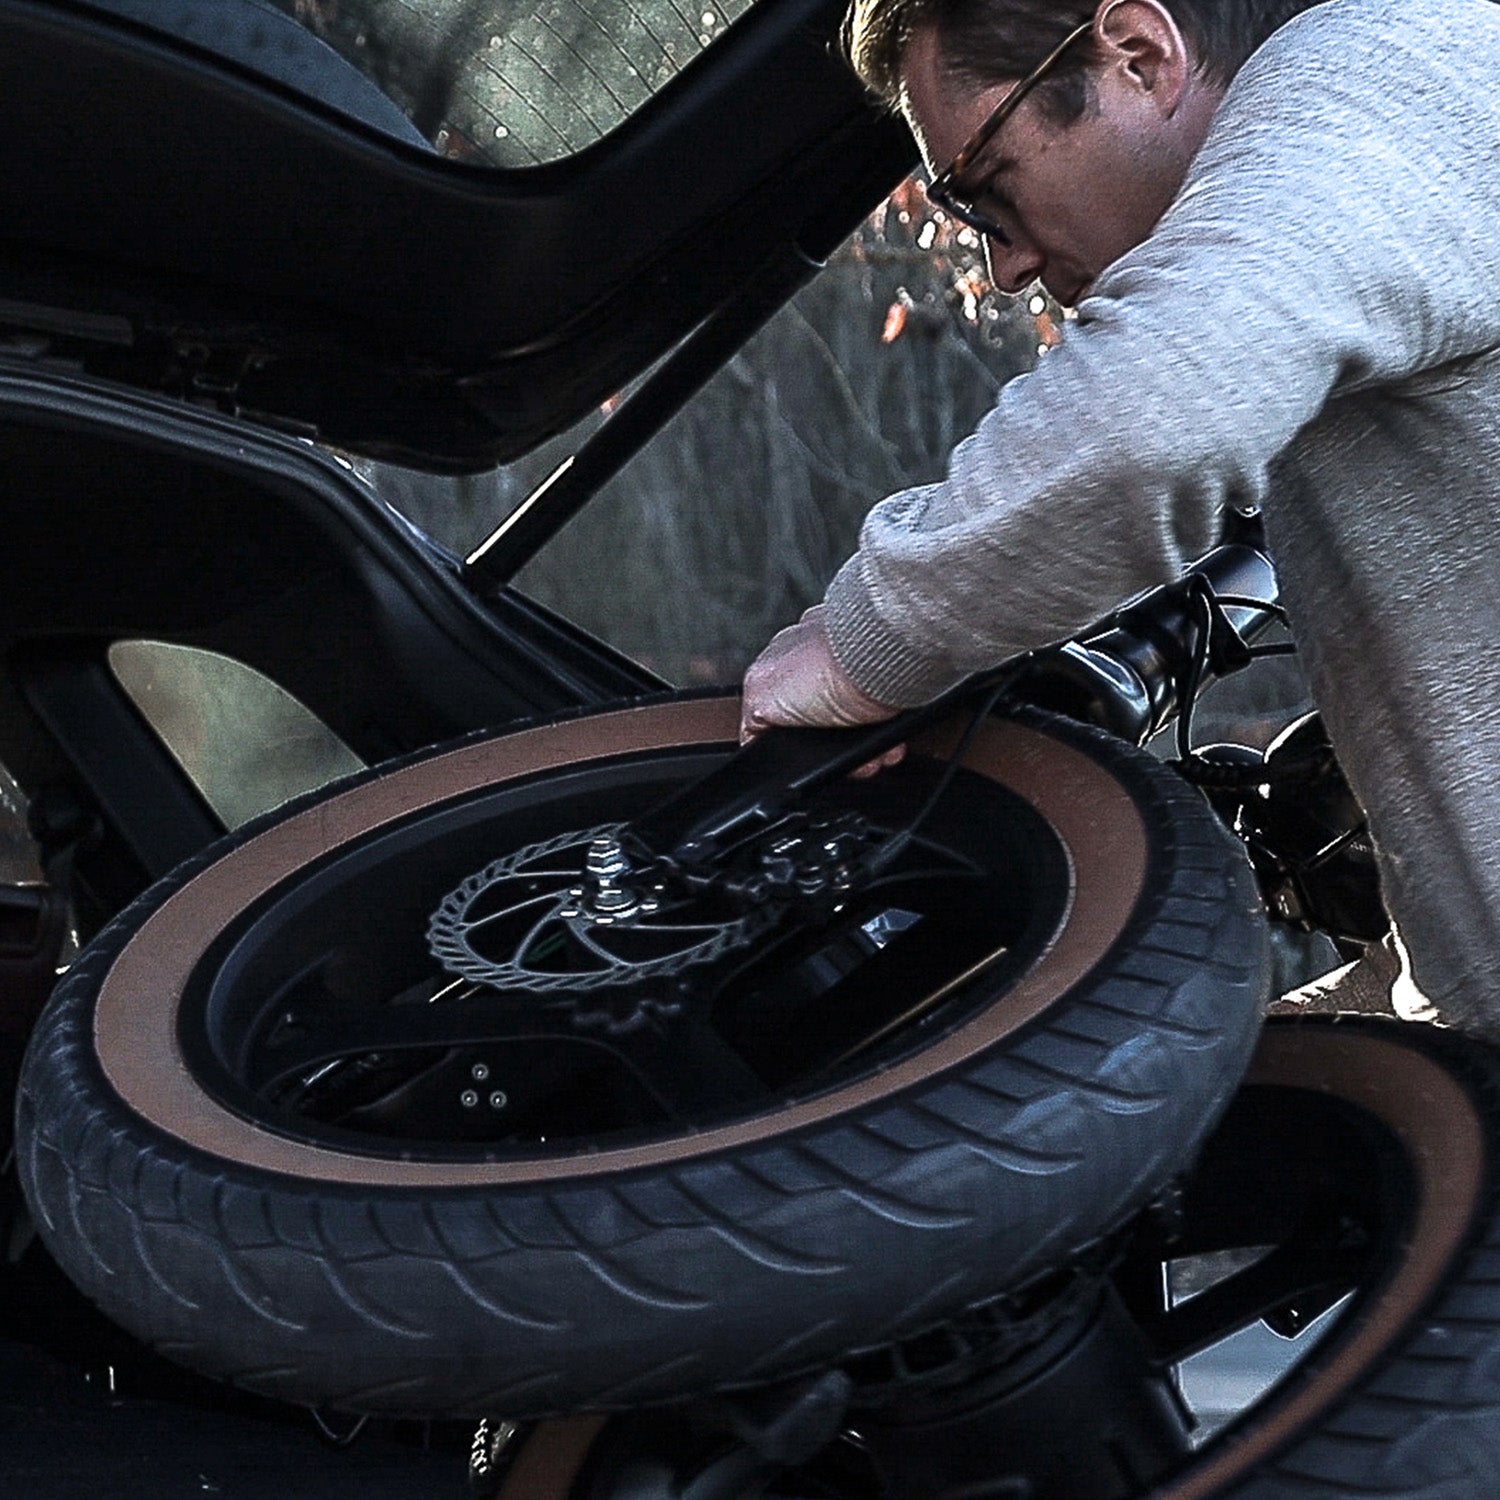 Man fitting the folded Emerald ebike in the trunk of his car.